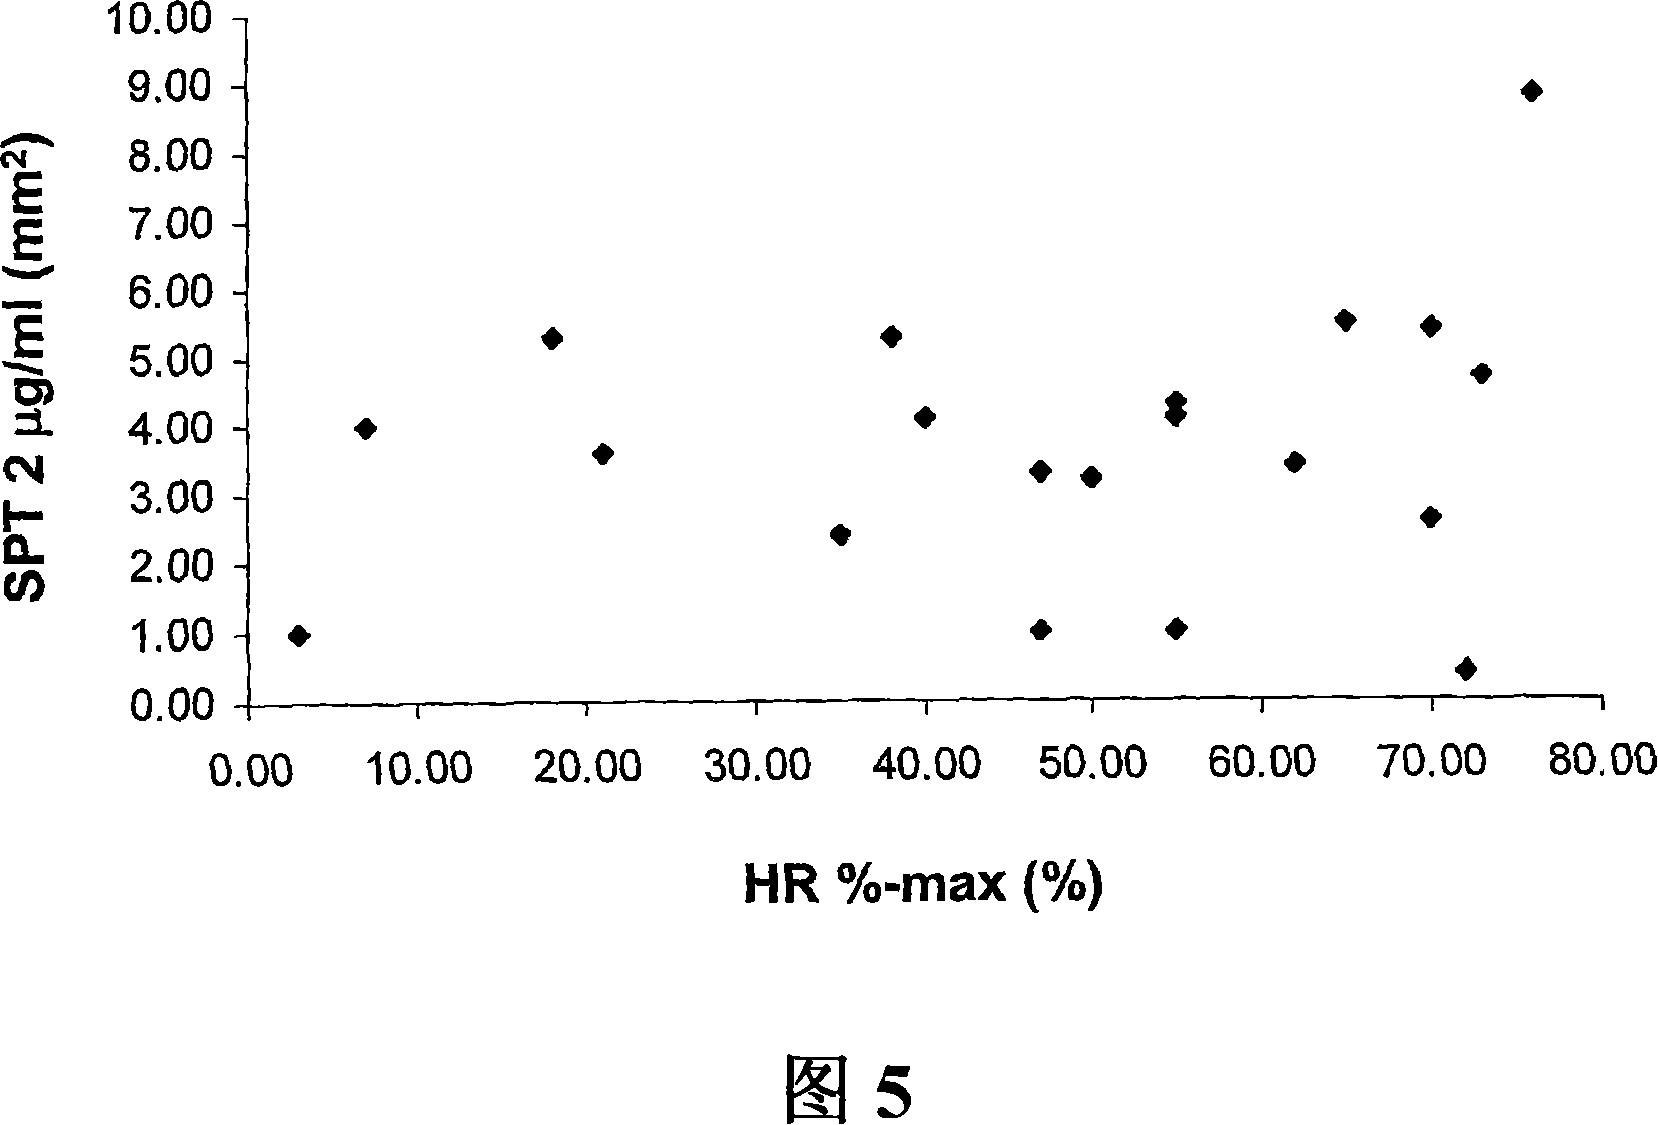 Method for evaluating the allergen sensitivity of an individual